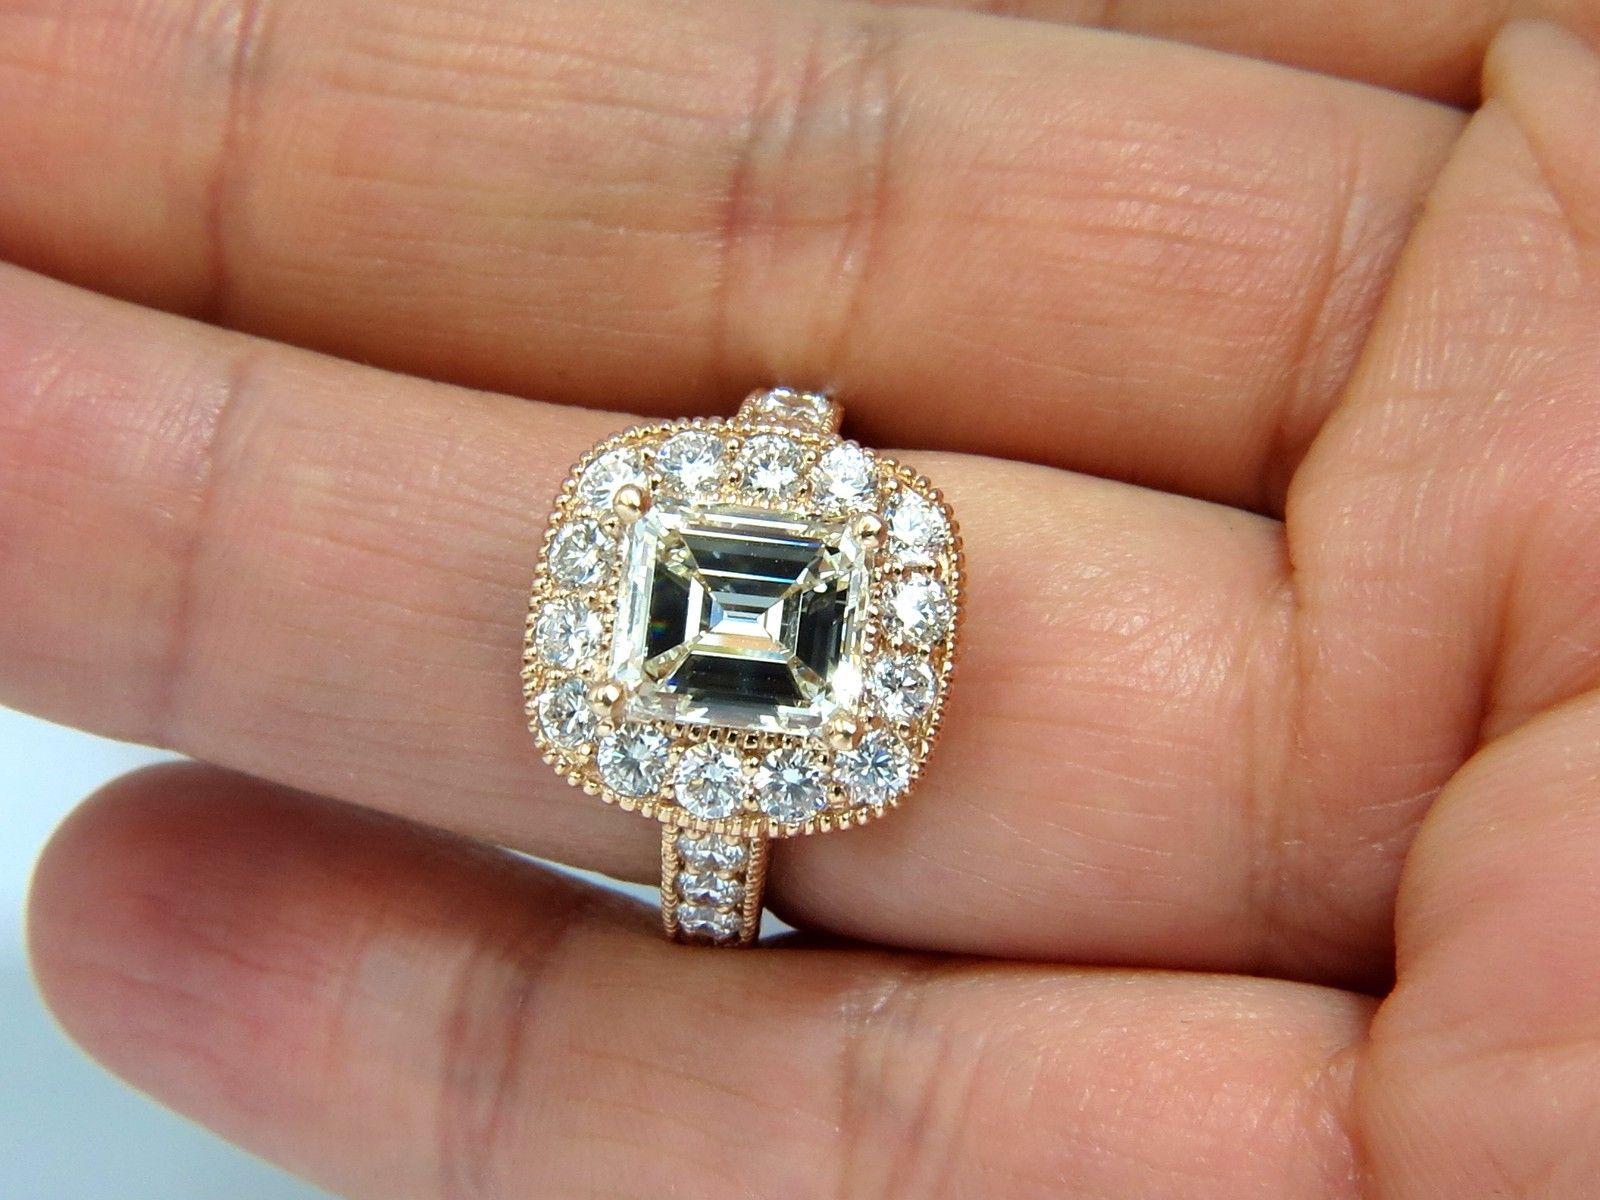 GIA 2.97ct. Emerald cut diamond & 2.40ct. diamonds ring.

Emerald cut , Excellent Clean Clarity

L-color, VS-1 Clarity 

(GIA Report attached)



2.40cts of Side round diamonds: 

G-color, Vs-2 clarity.

18kt. rose gold

10 grams.

current ring